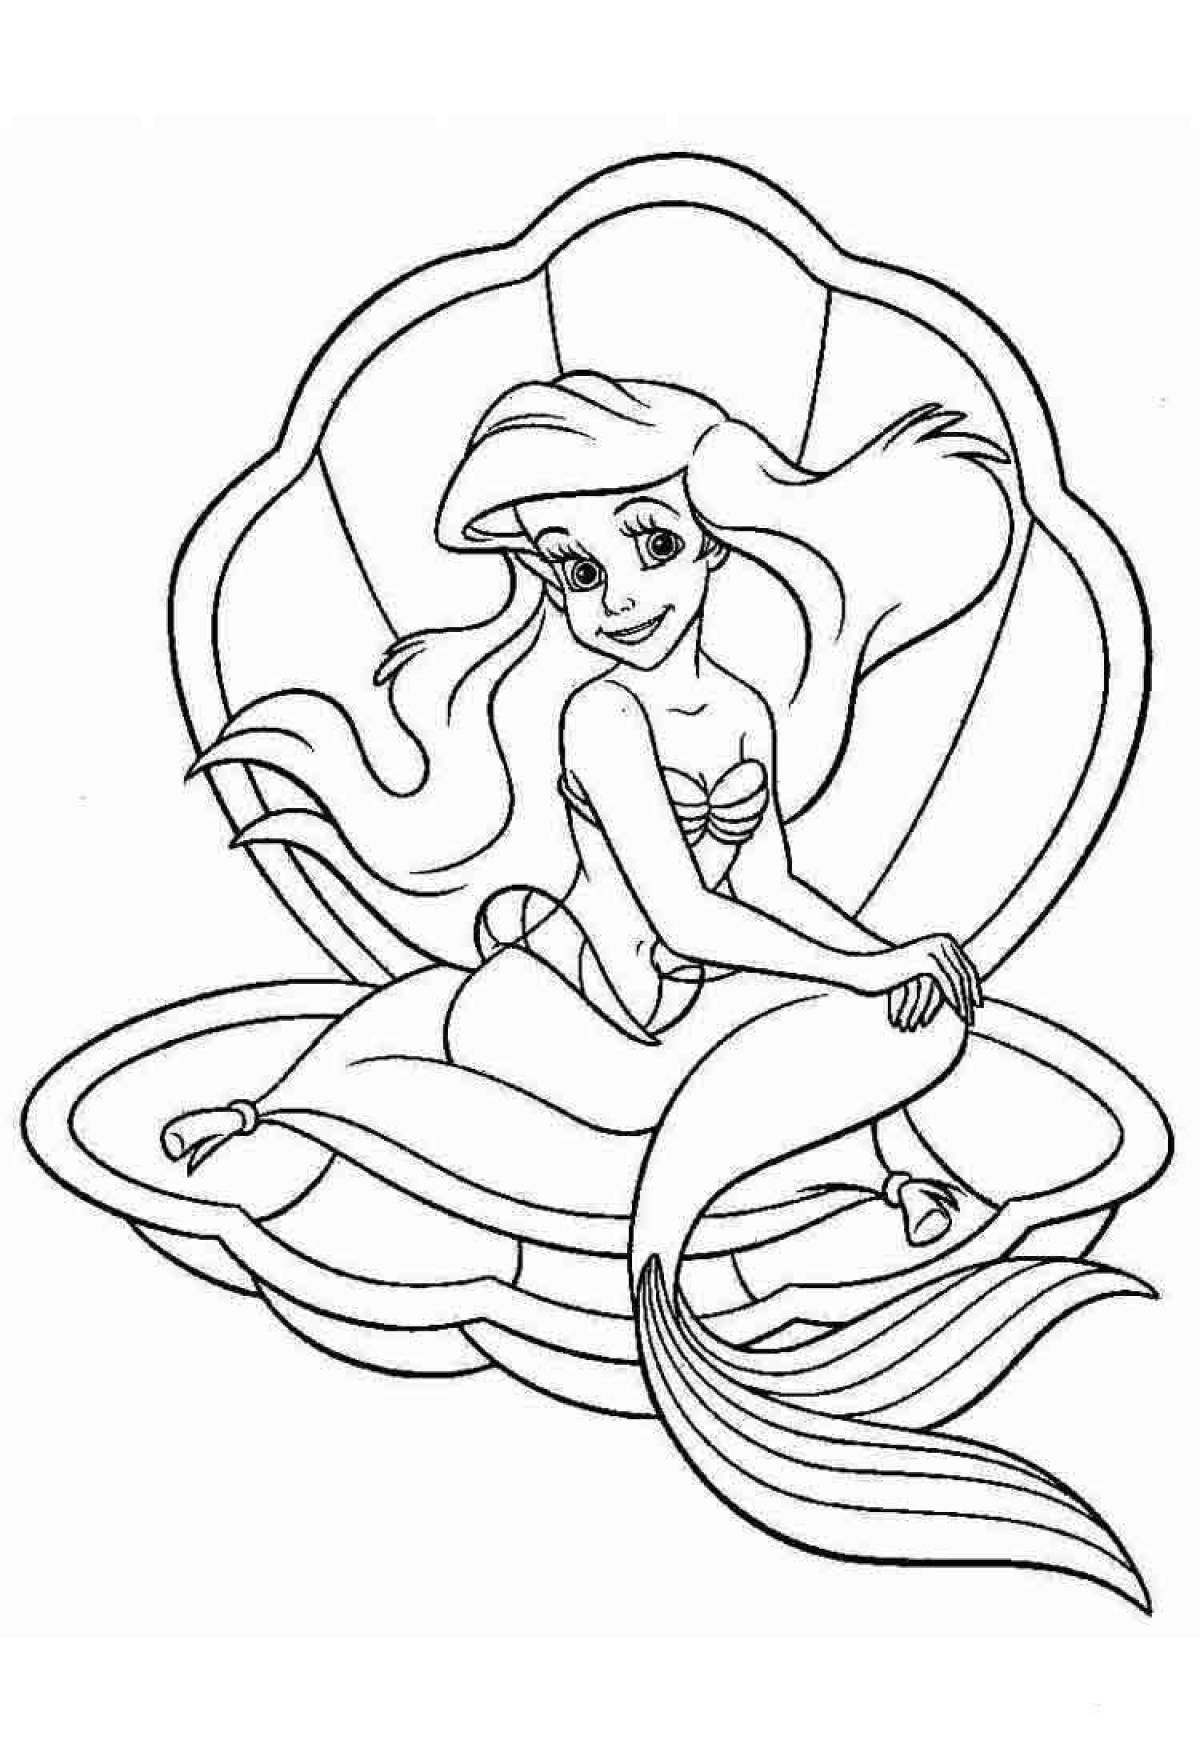 Glittering mermaid coloring page